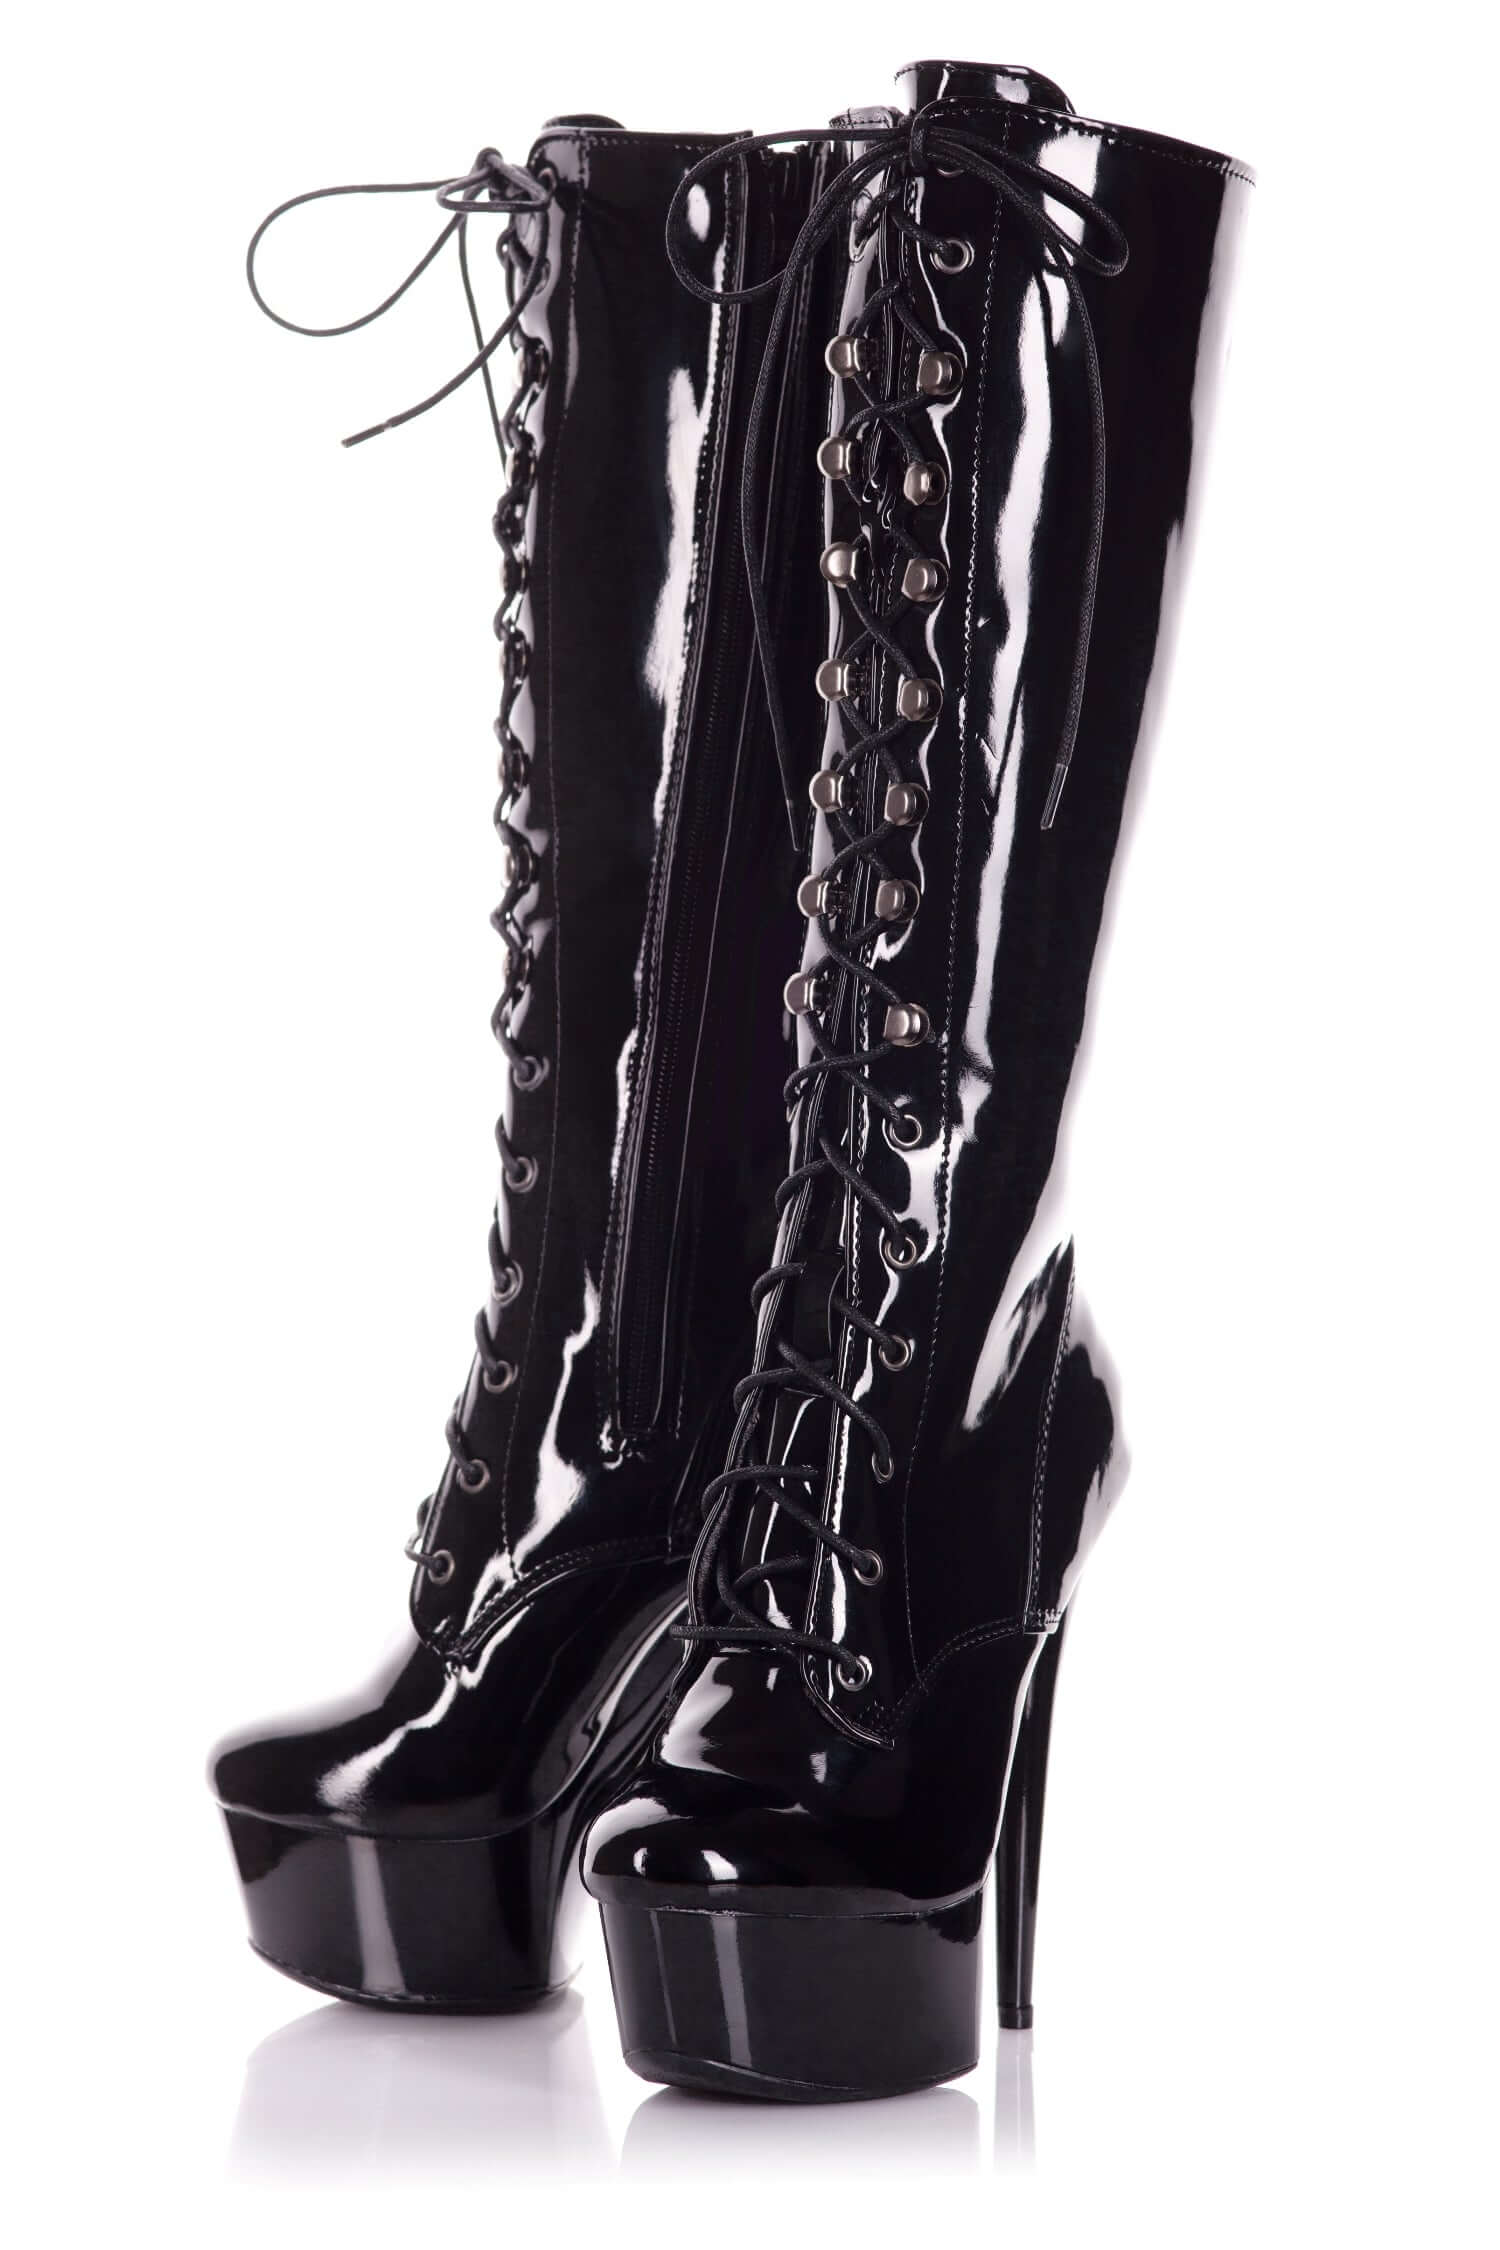 Gothic Gored Corset & Black Patent Boots